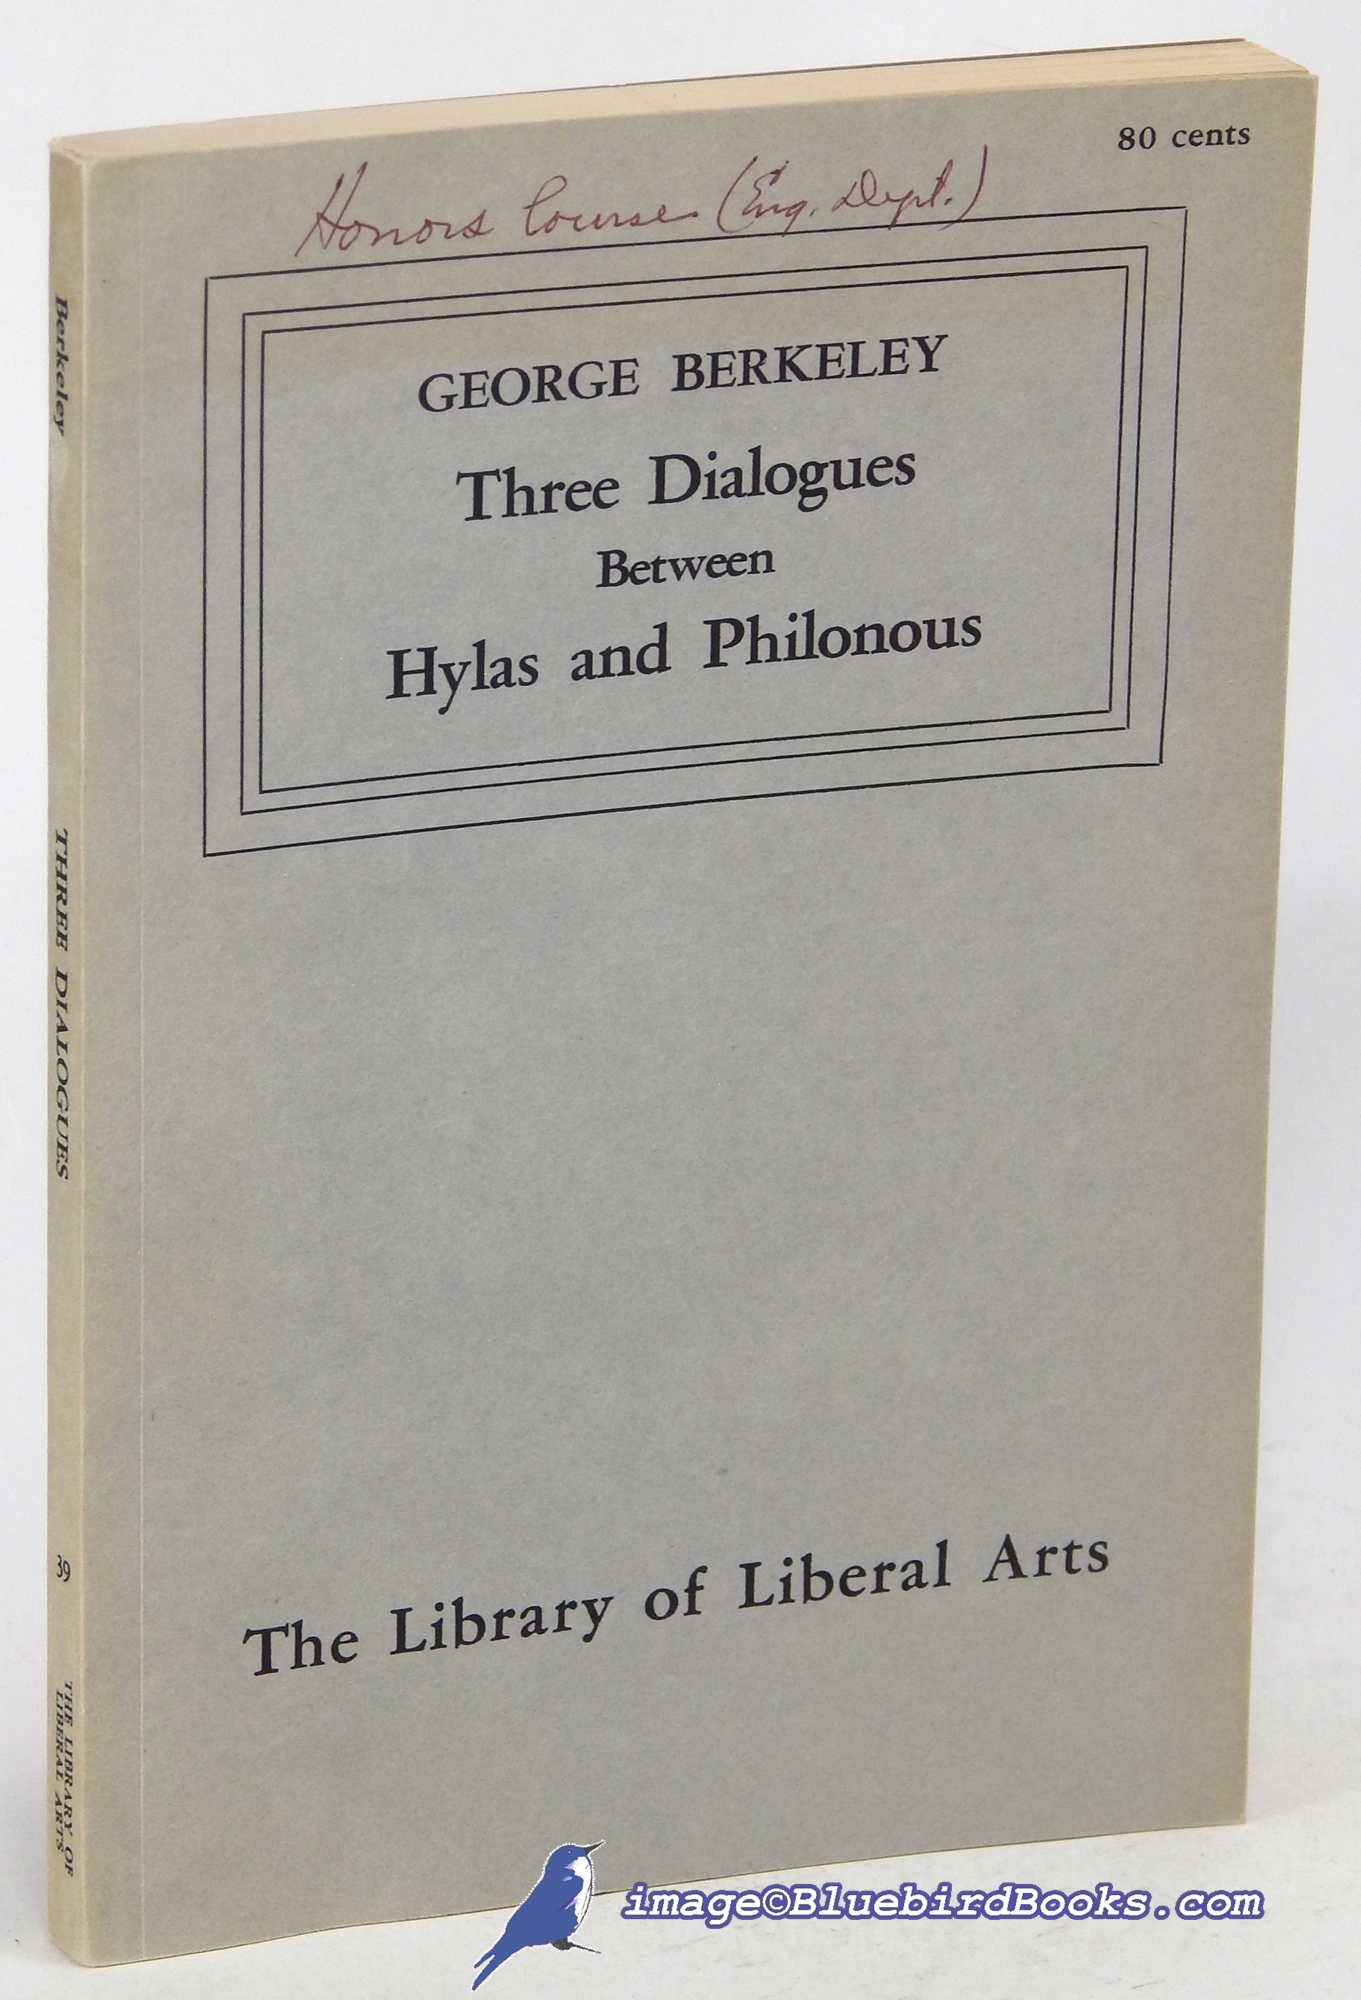 BERKELEY, GEORGE (AUTHOR); TURBAYNE, COLIN M. (EDITOR) - Three Dialogues between Hylas and Philonous (the Library of Liberal Arts, Number Thirty-Nine)